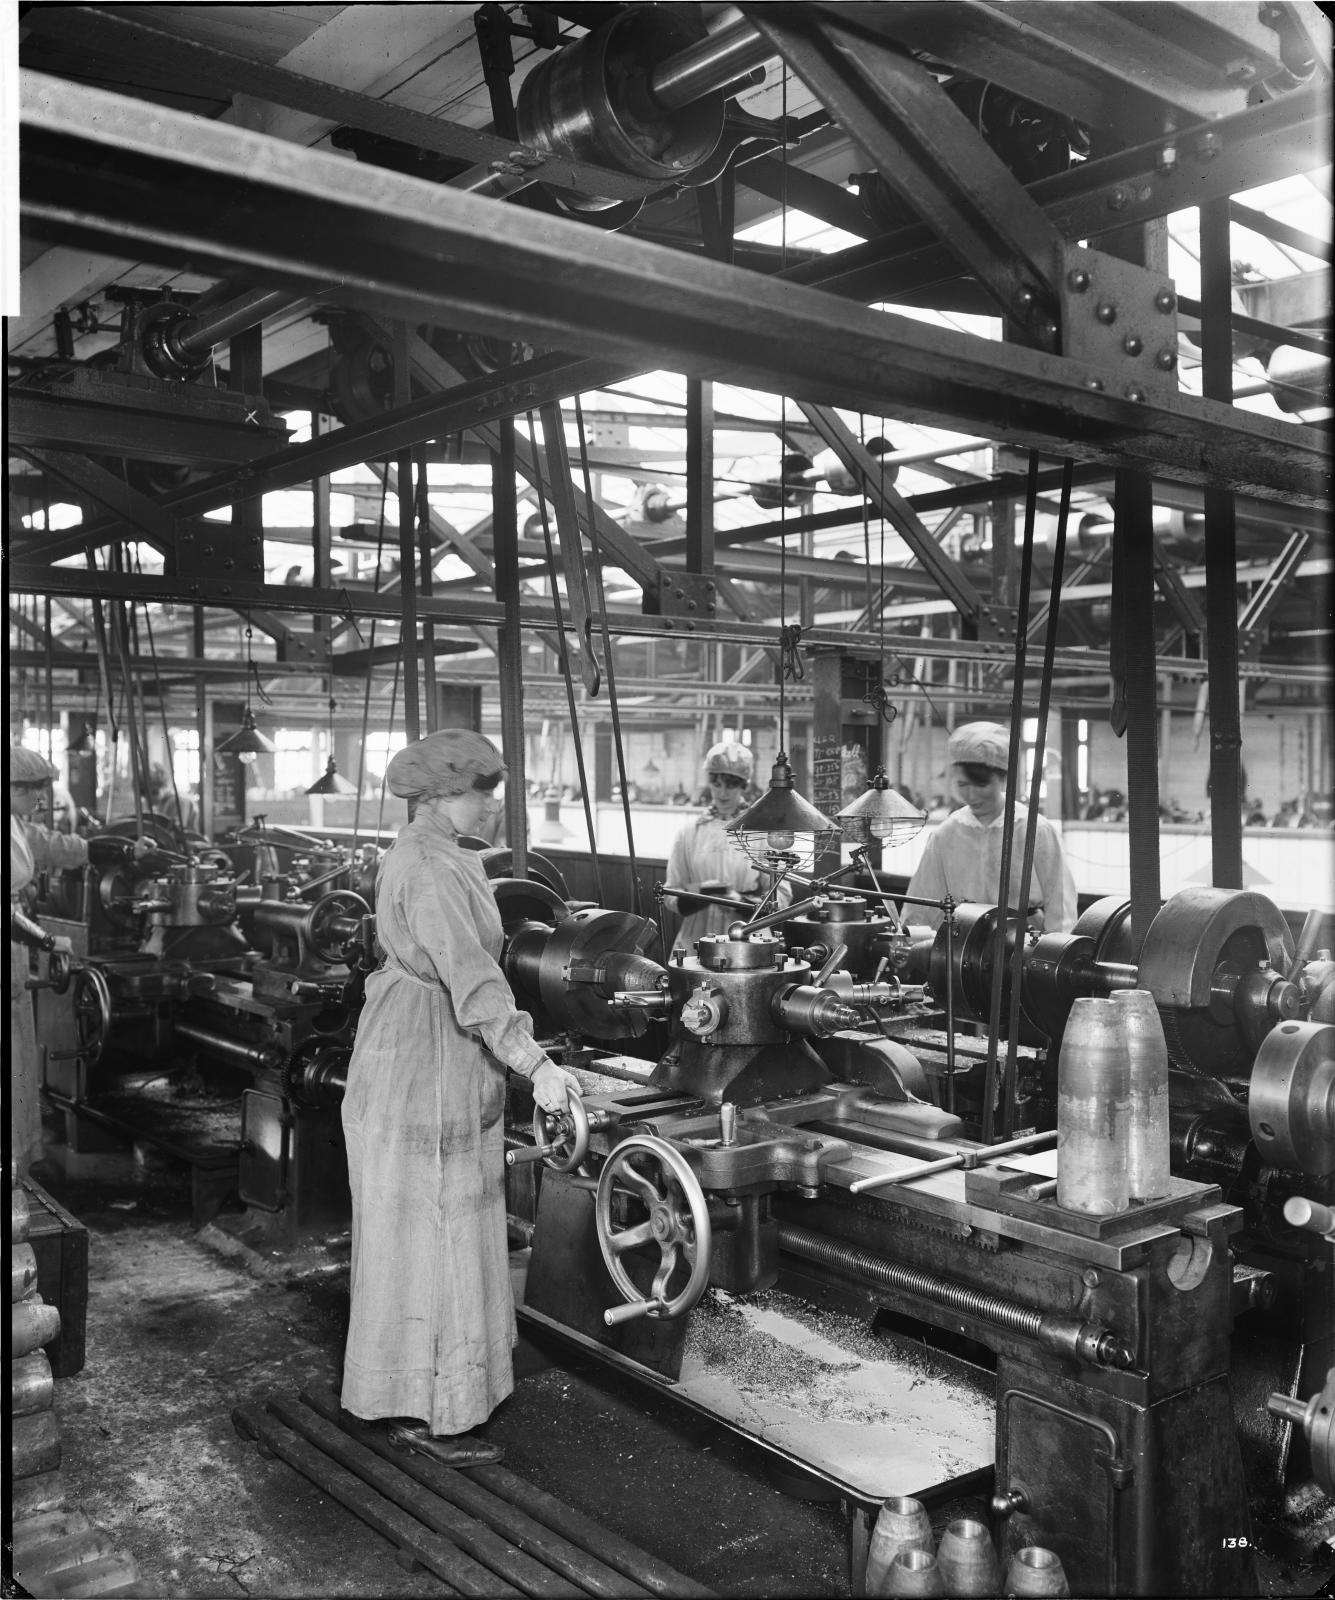 Turning steel at the Cunard Shell Works, Birkenhead, Bedford Lemere 1917. © Historic England. Images are from the National Monuments Record, and published in WORK (£9.99) from English Heritage’s The Way We Were series.